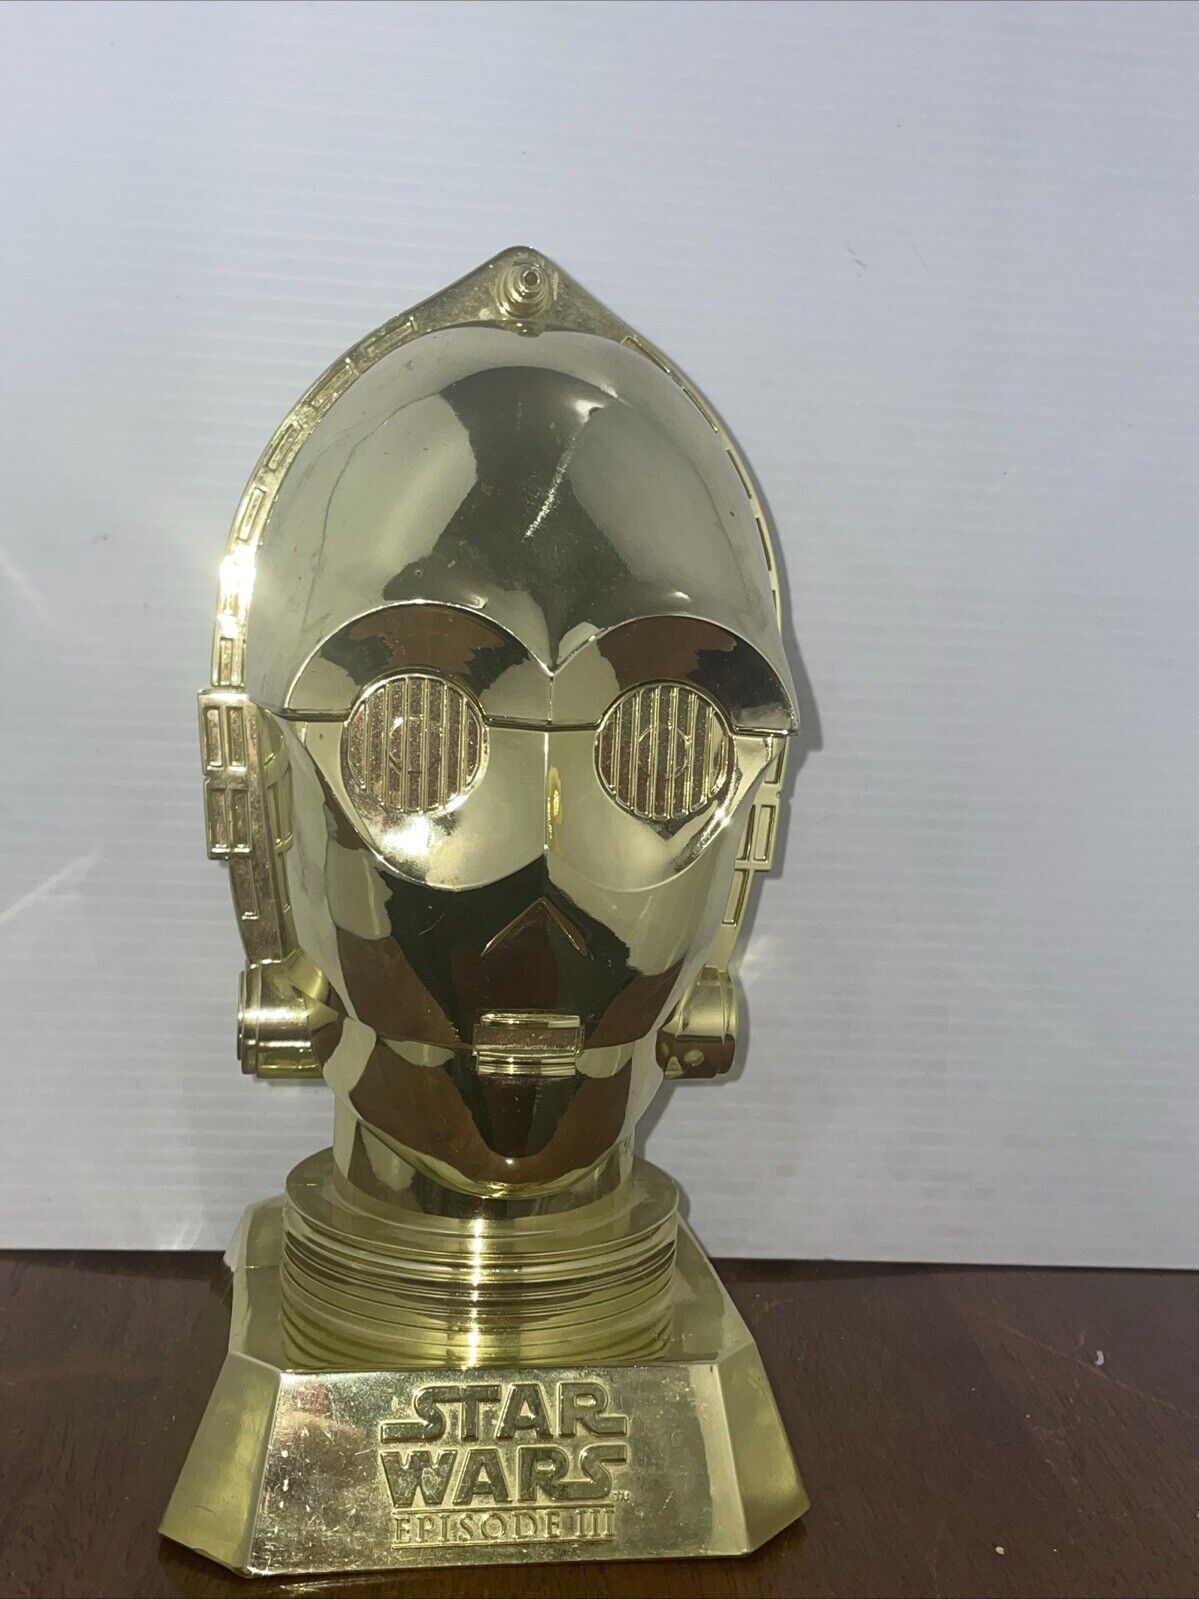 C-3PO Droid Figural Bust Cookie Jar 2005 Star Wars Revenge of the Sith Kelloggs